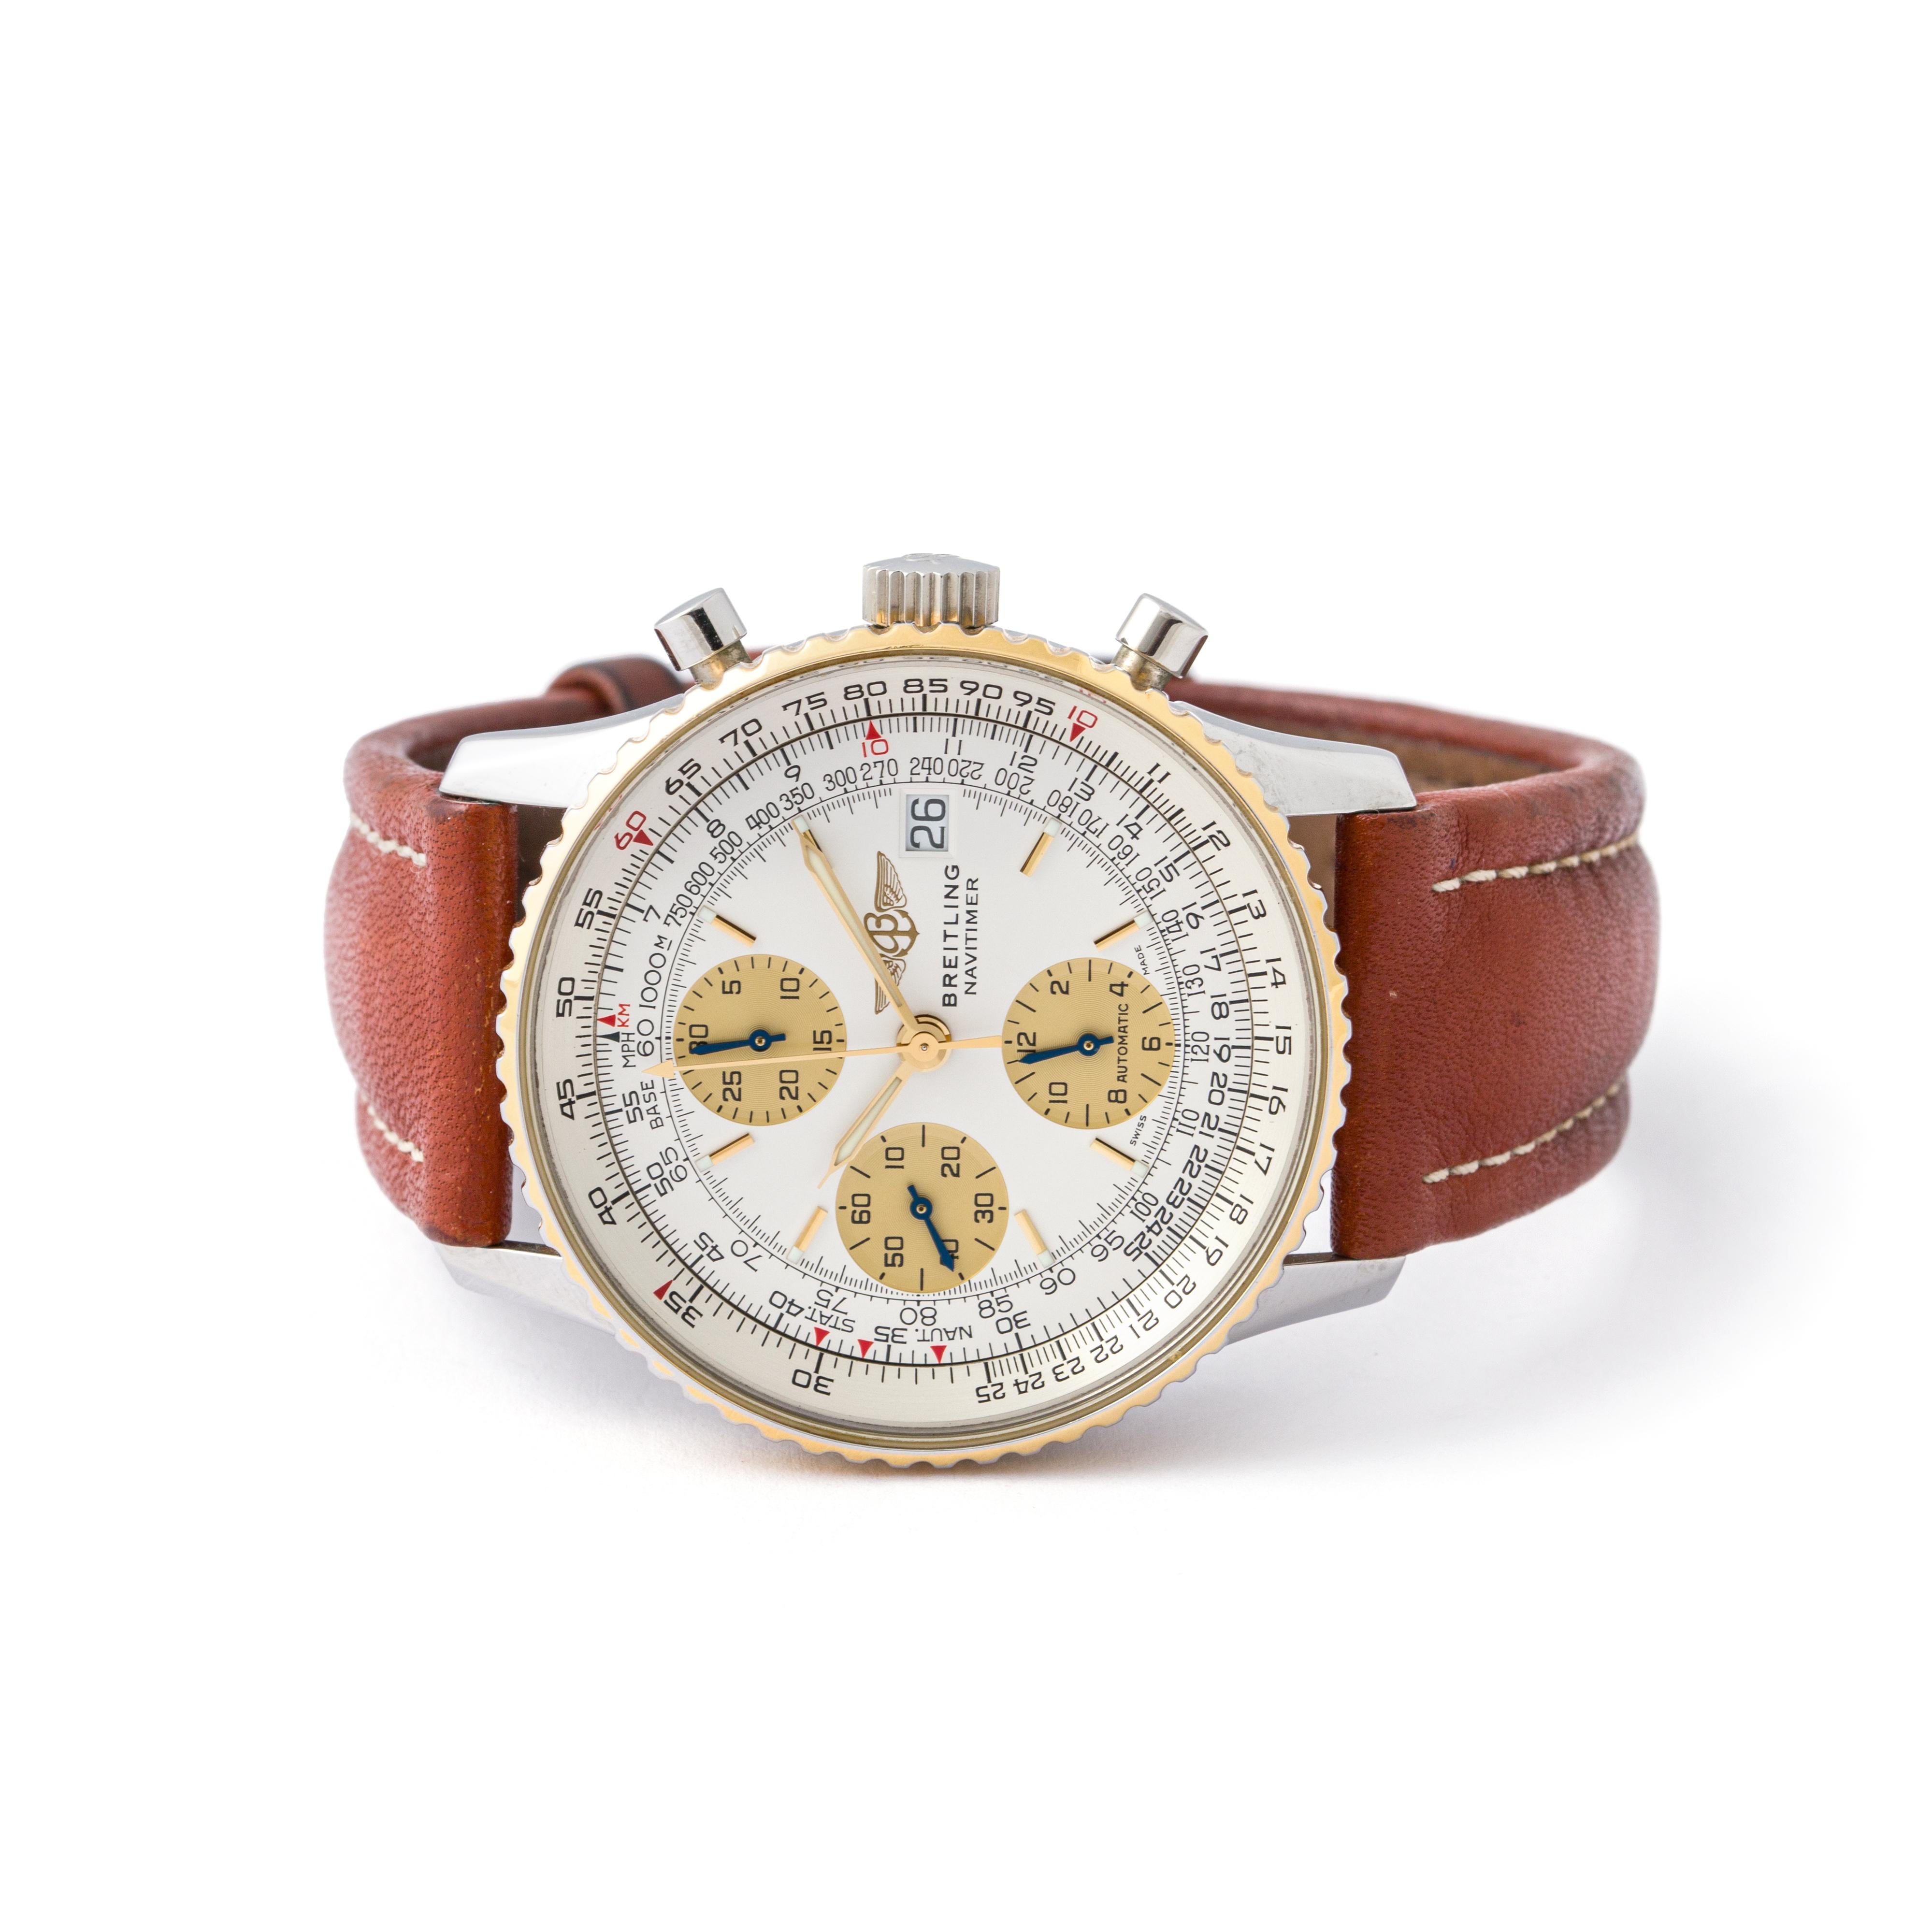 Breitling Navitimer Wristwatch. Ref. 81610. Circa 1990.
Stainless steel and yellow gold automatic chronograph.
Case diameter: 41 mm.
Wrist length: approximately 19.00 centimeters up to 22.20 centimeters.

Total weight: 85.97 grams.
We do not